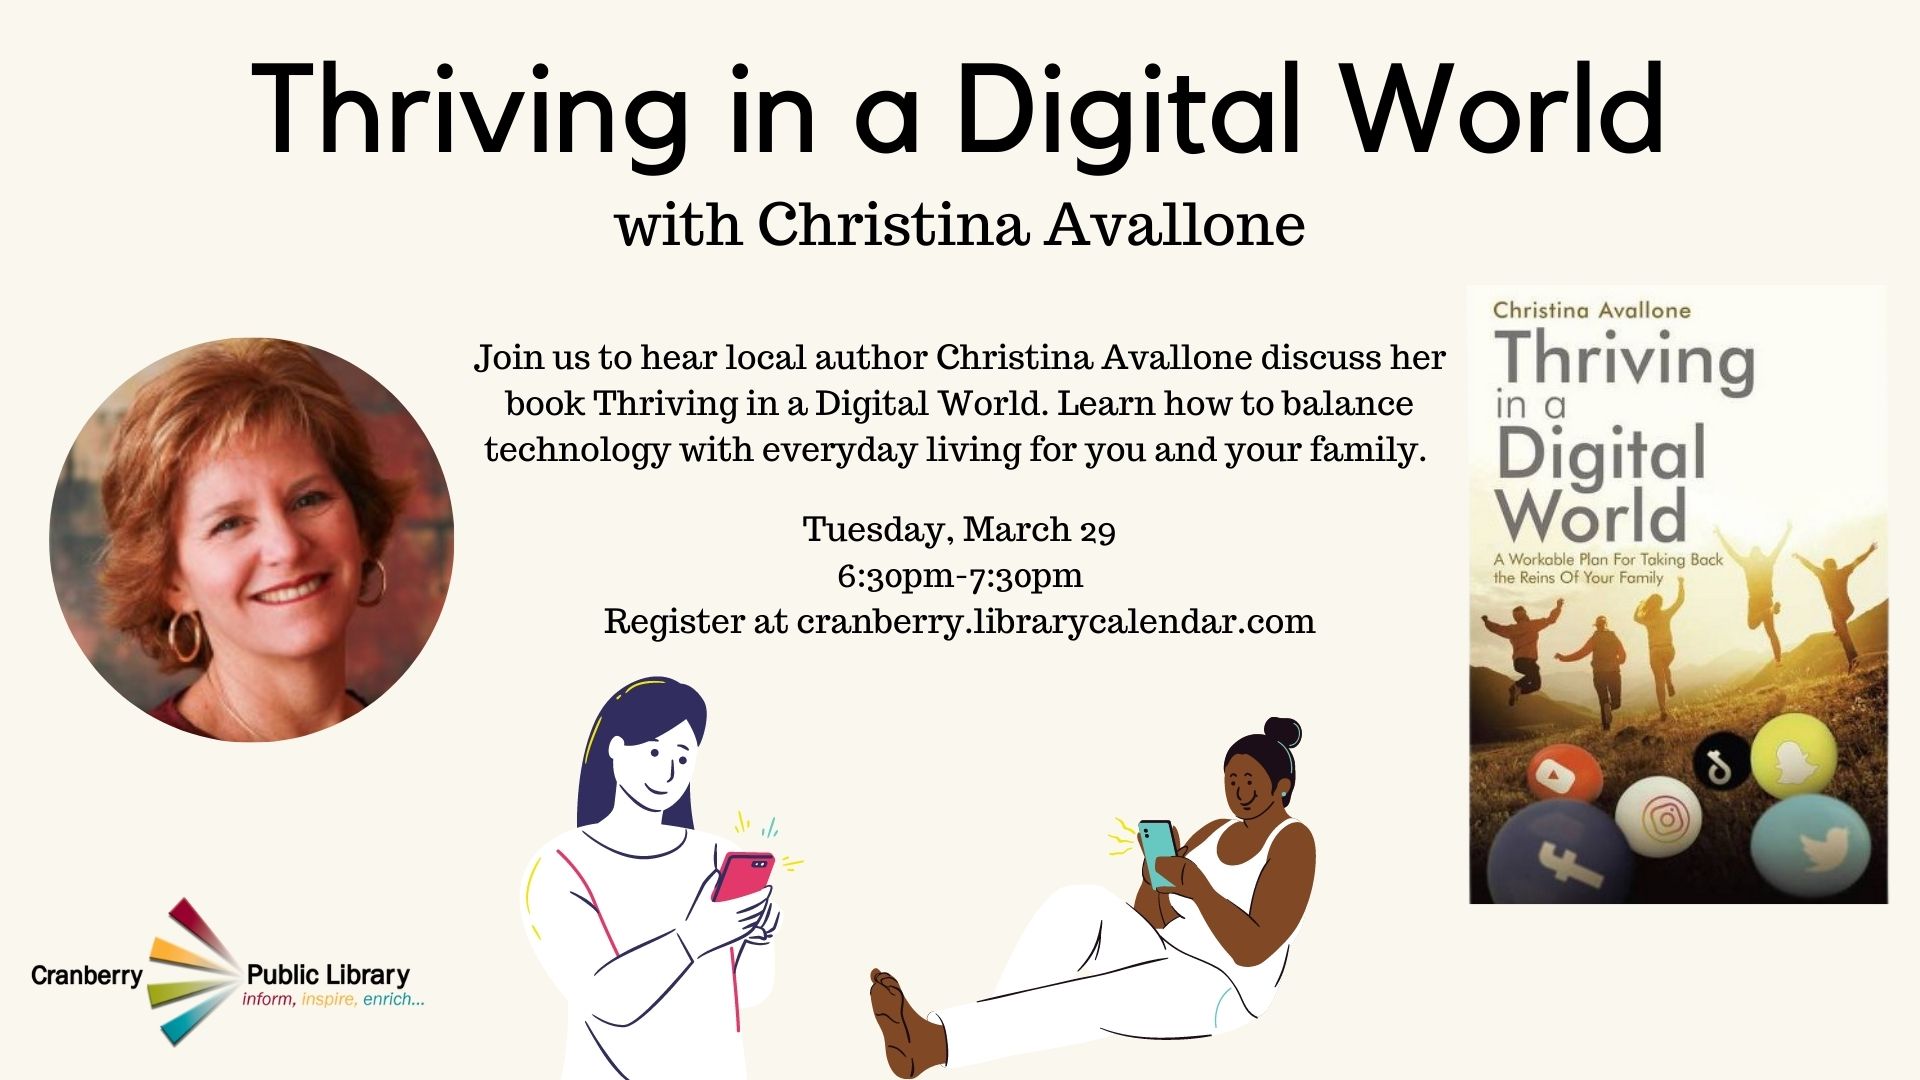 Picture of Christina Avallone and her book Thriving in a Digital World